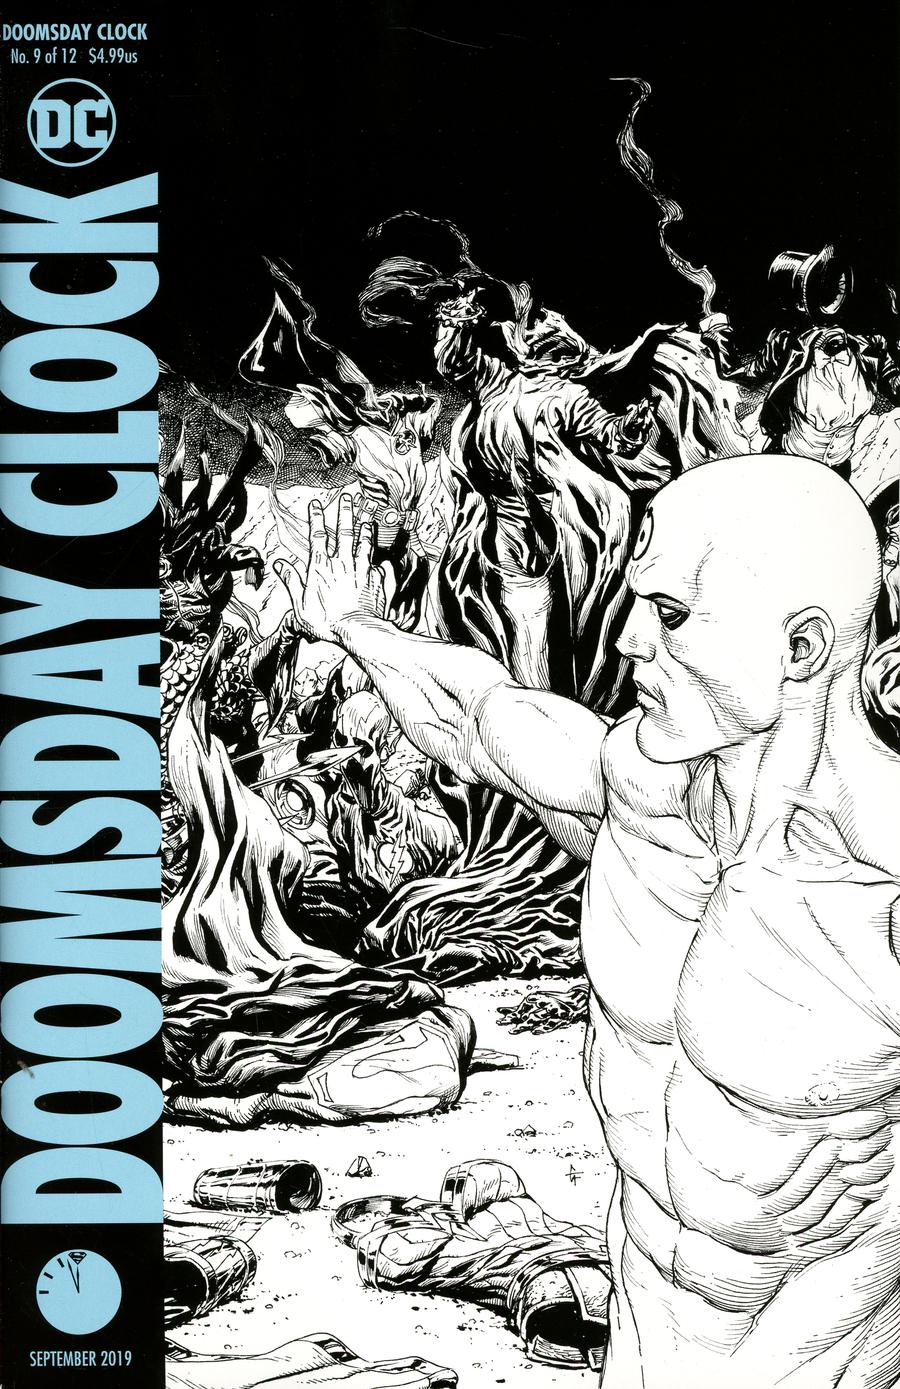 Doomsday Clock #9 (Of 12) 2nd Printing